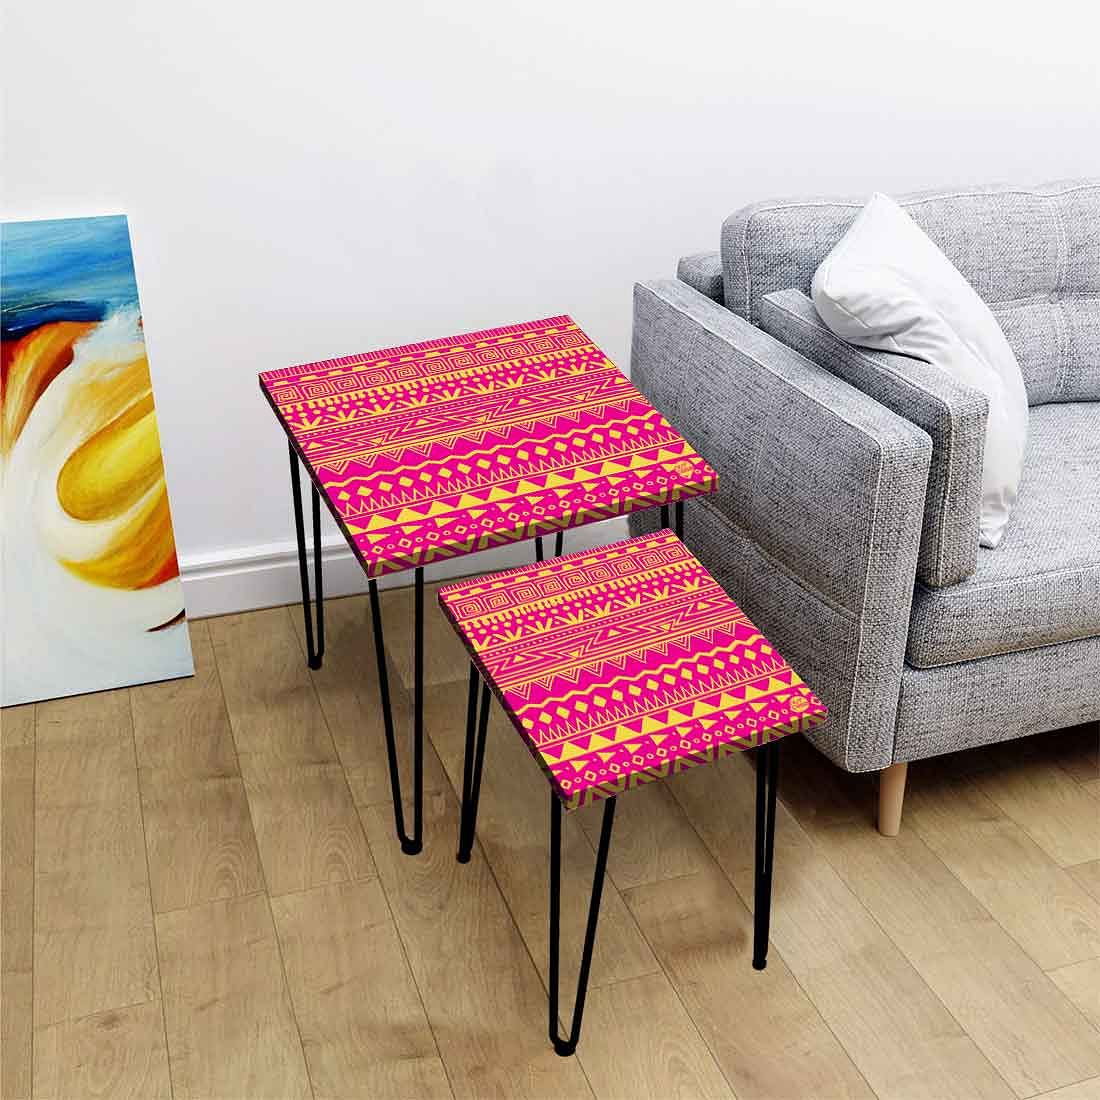 Coffee Table Nest of Tables for Home & Bedroom Set 2 - Pink Patterns Nutcase